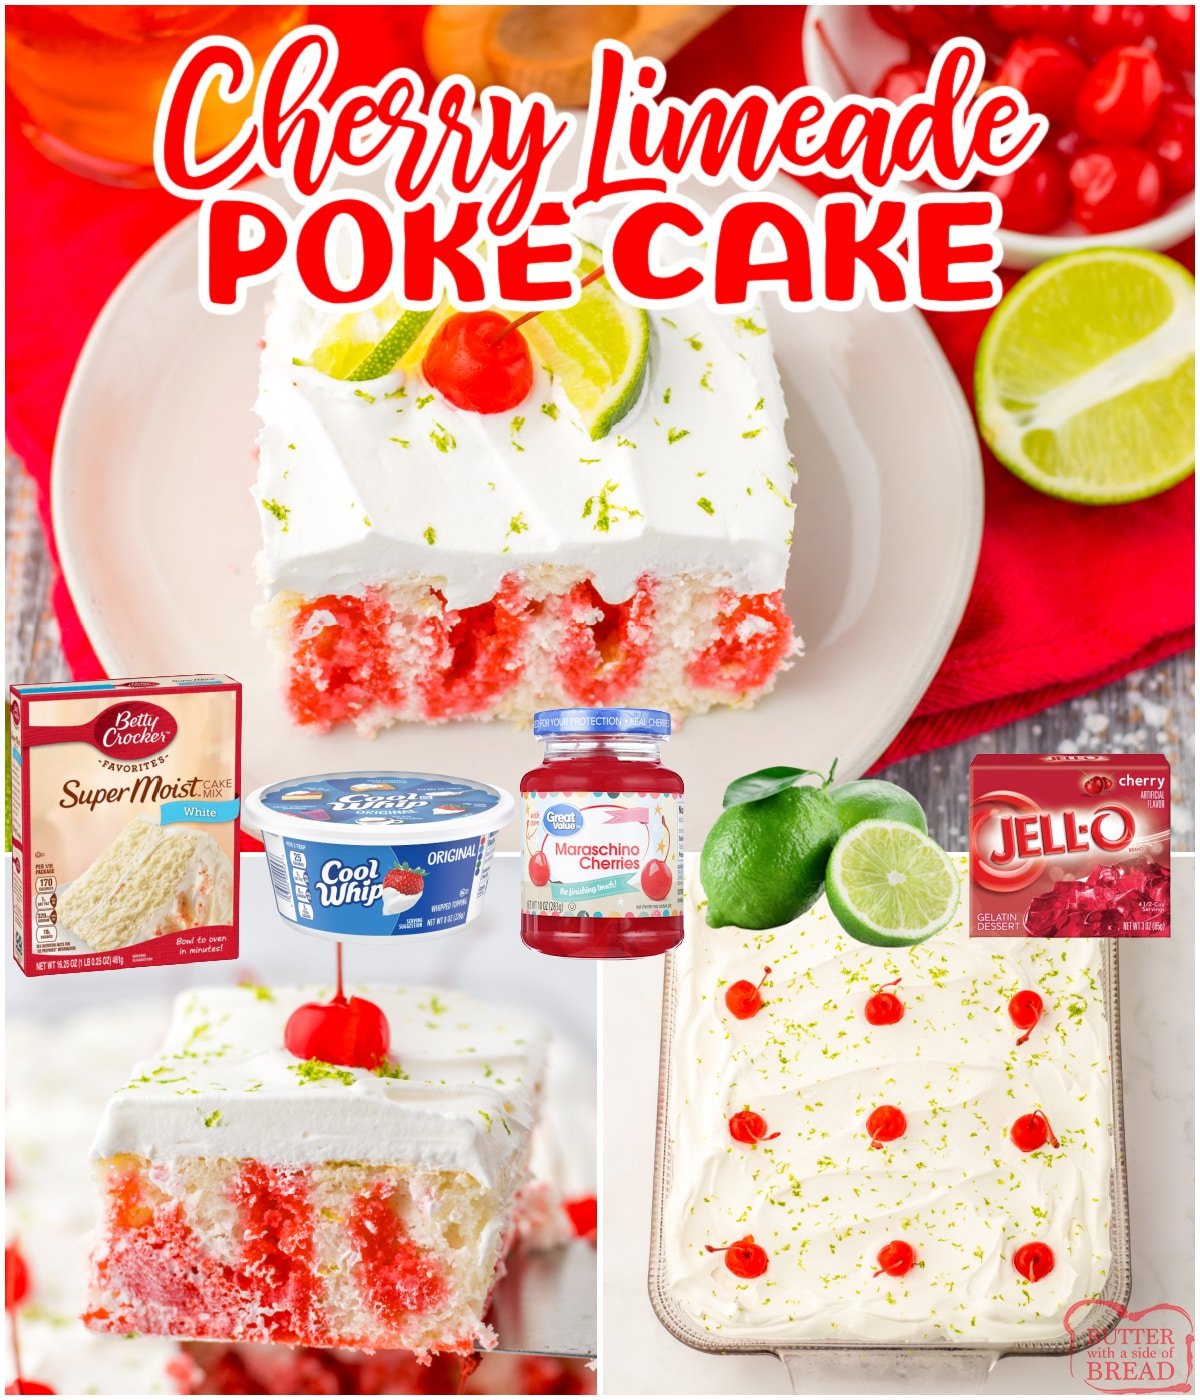 Cherry Limeade Poke Cake is made with cherry jello, whipped cream, lime zest, and maraschino cherries. This cake is cool and refreshing and tastes like a tall, icy glass of cherry limeade. 